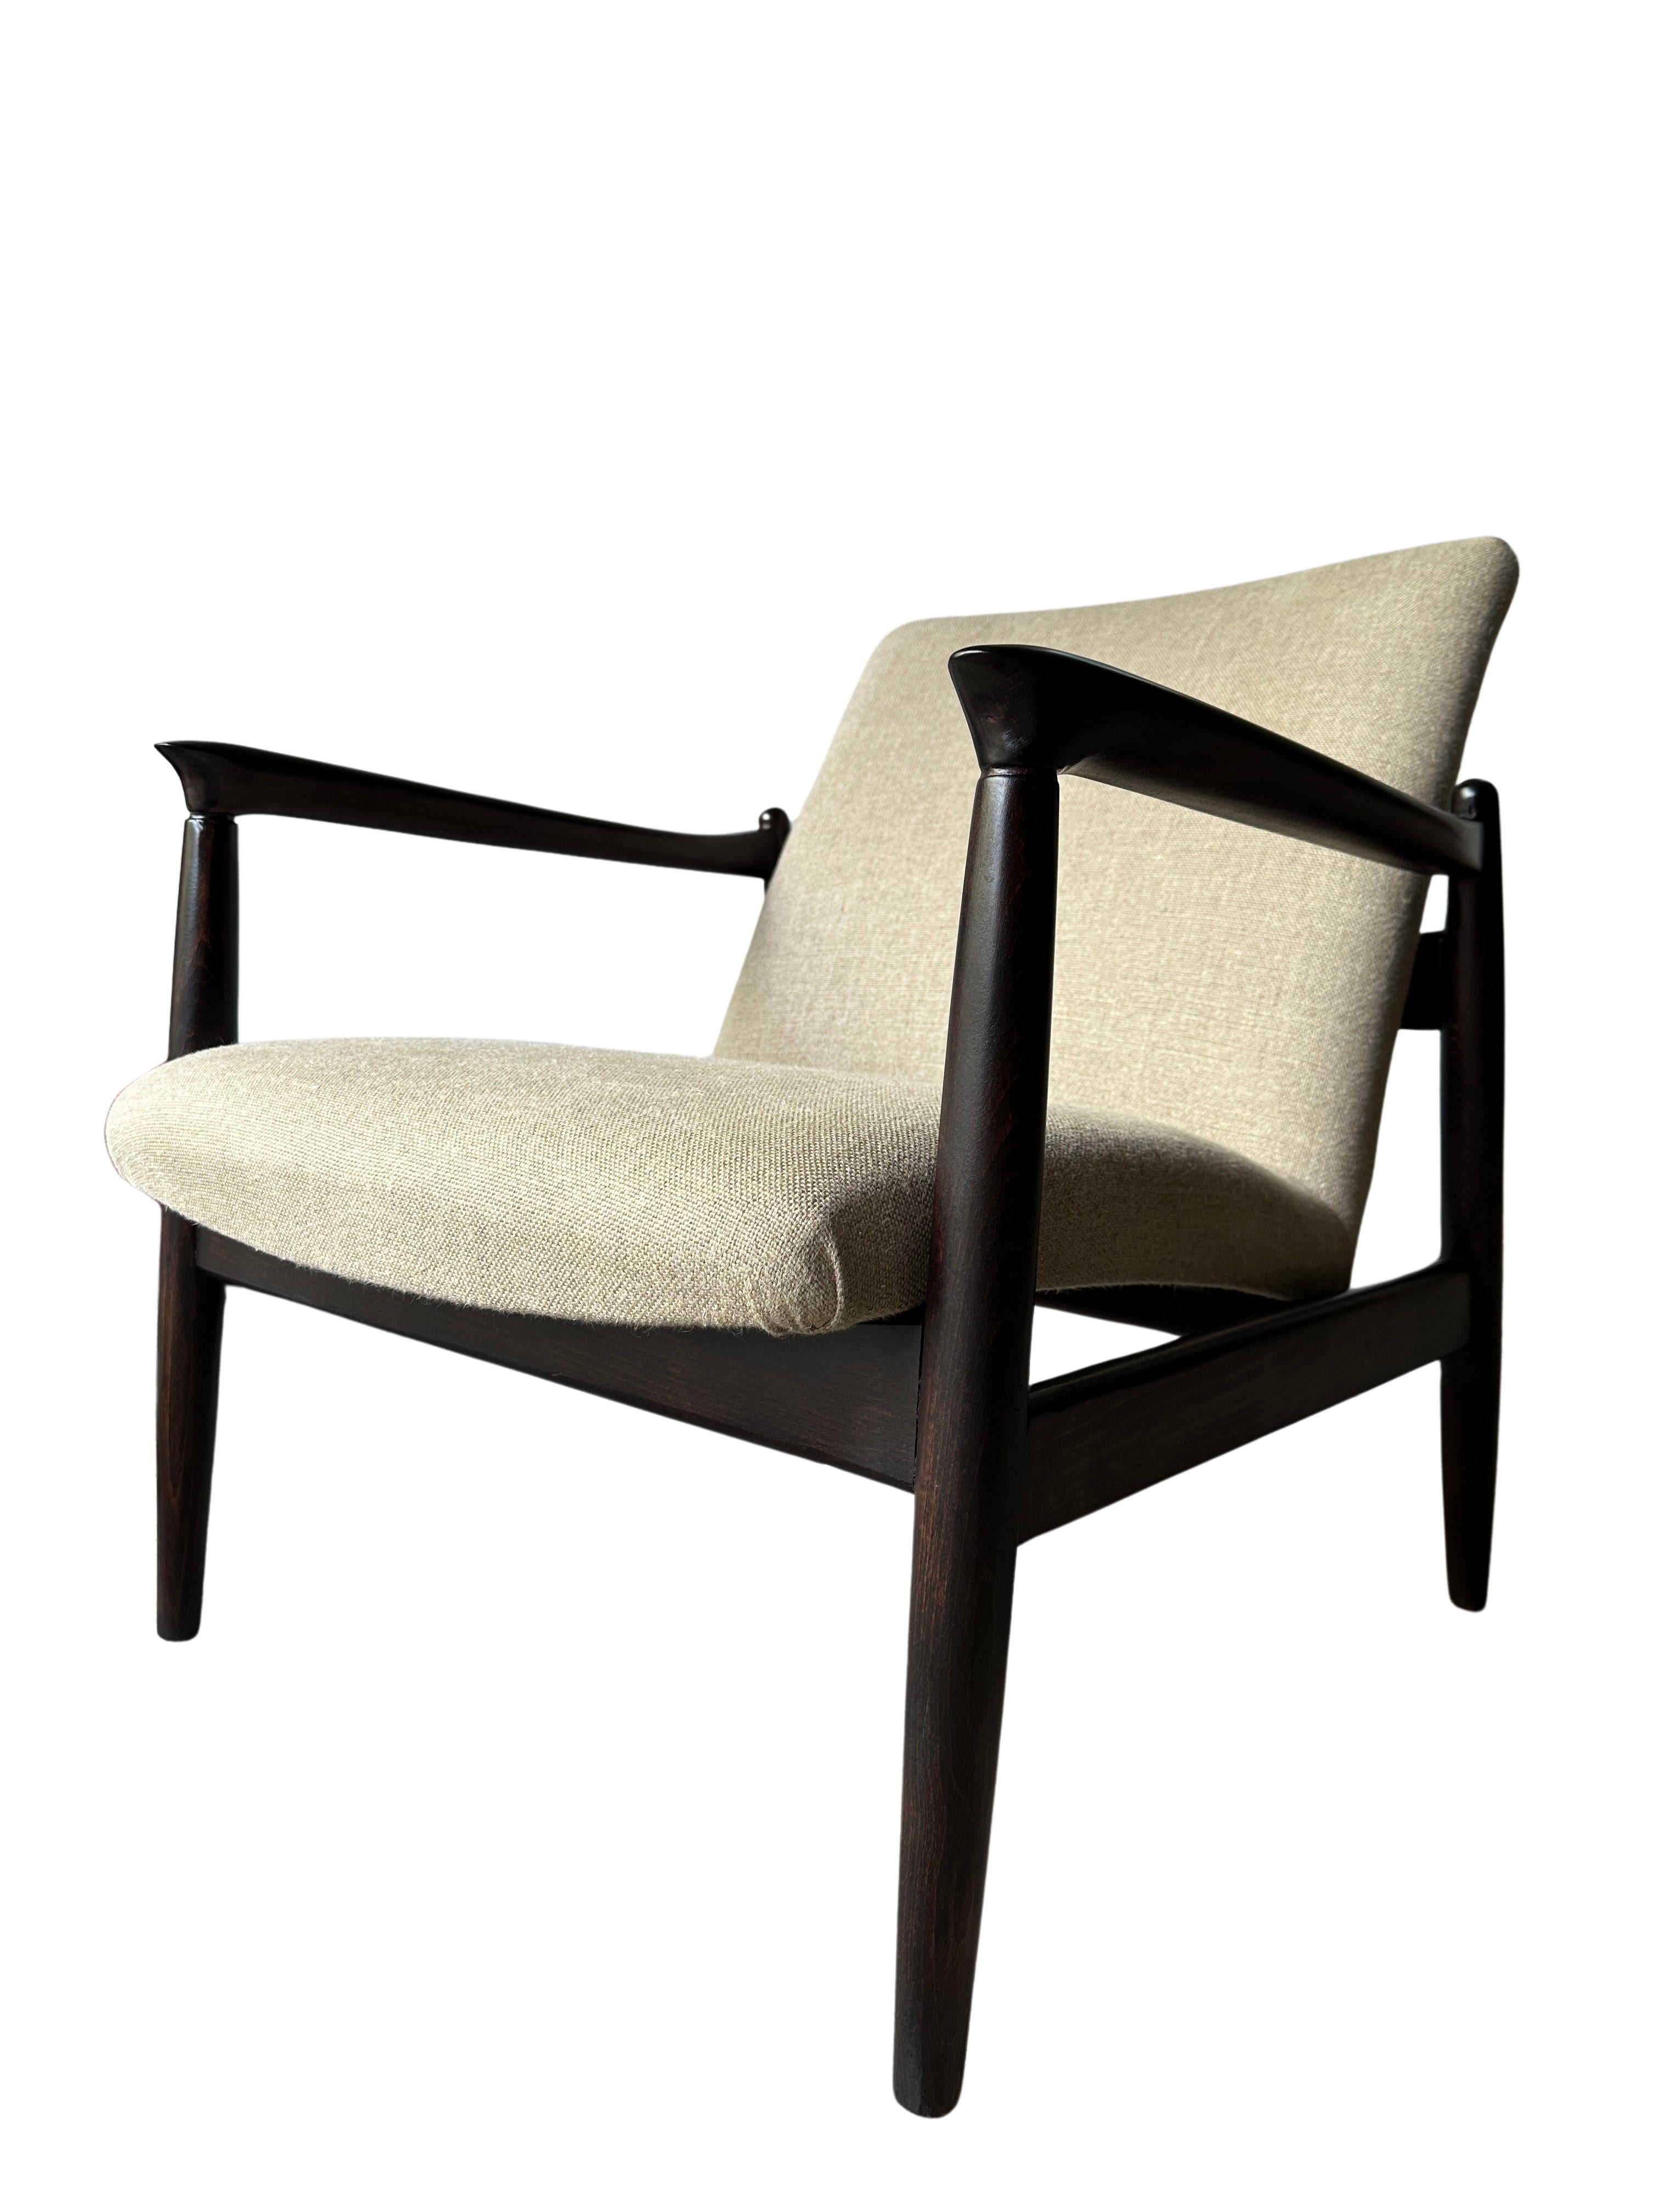 Pair of Mid Century Pure Linen GFM-64 Armchairs by Edmund Homa, 1960s For Sale 2